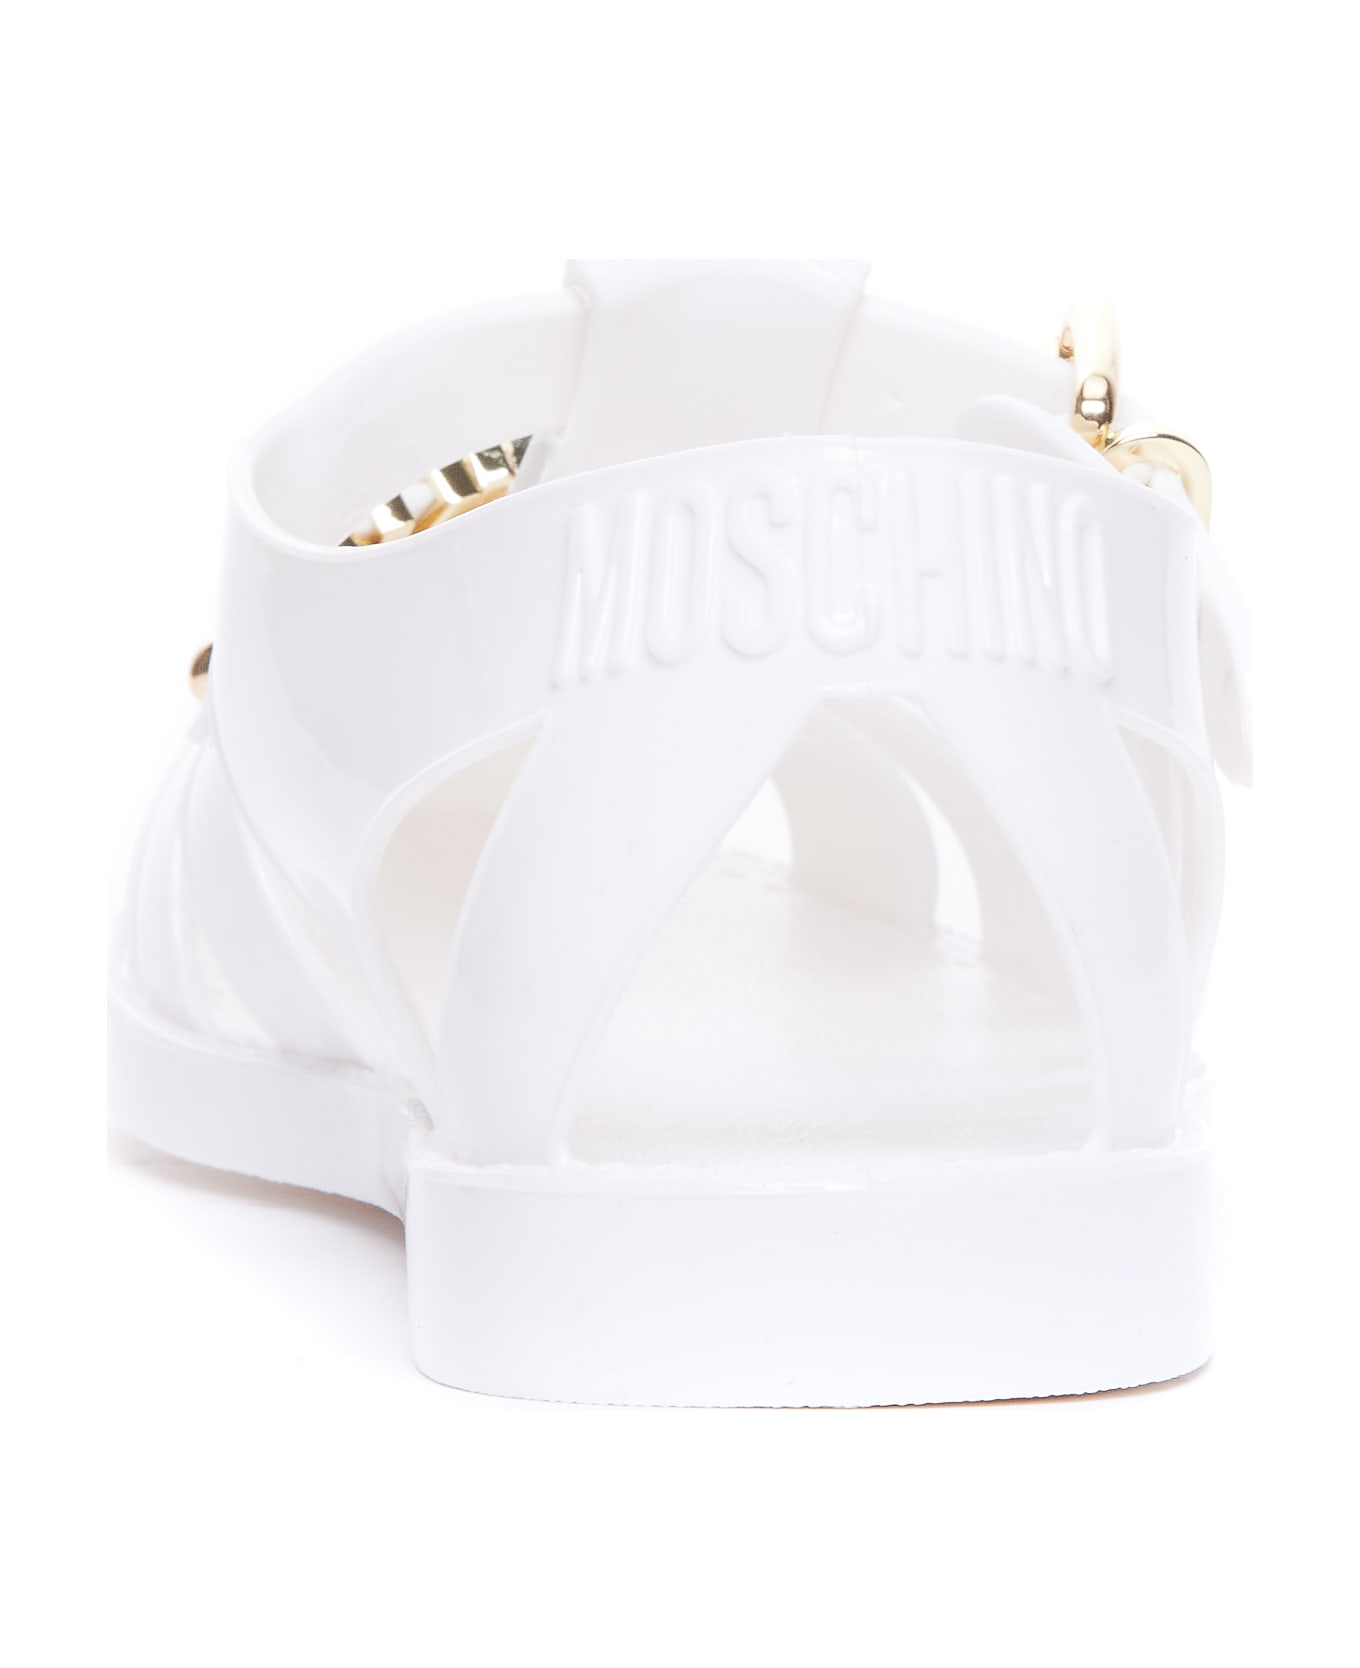 Moschino Jelly Sandals With Lettering Logo - White サンダル